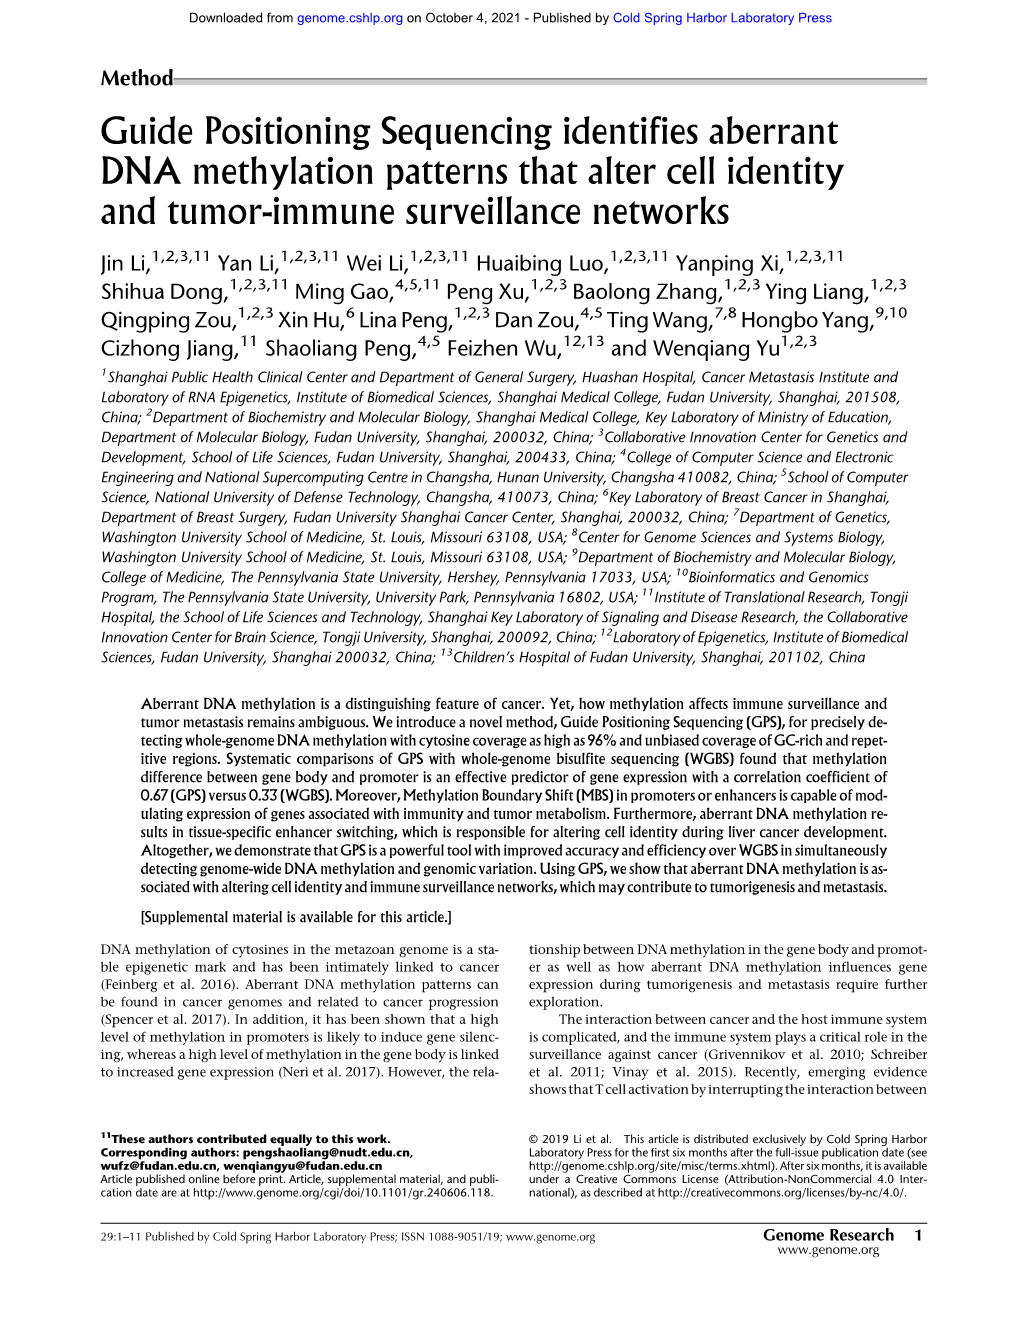 Guide Positioning Sequencing Identifies Aberrant DNA Methylation Patterns That Alter Cell Identity and Tumor-Immune Surveillance Networks